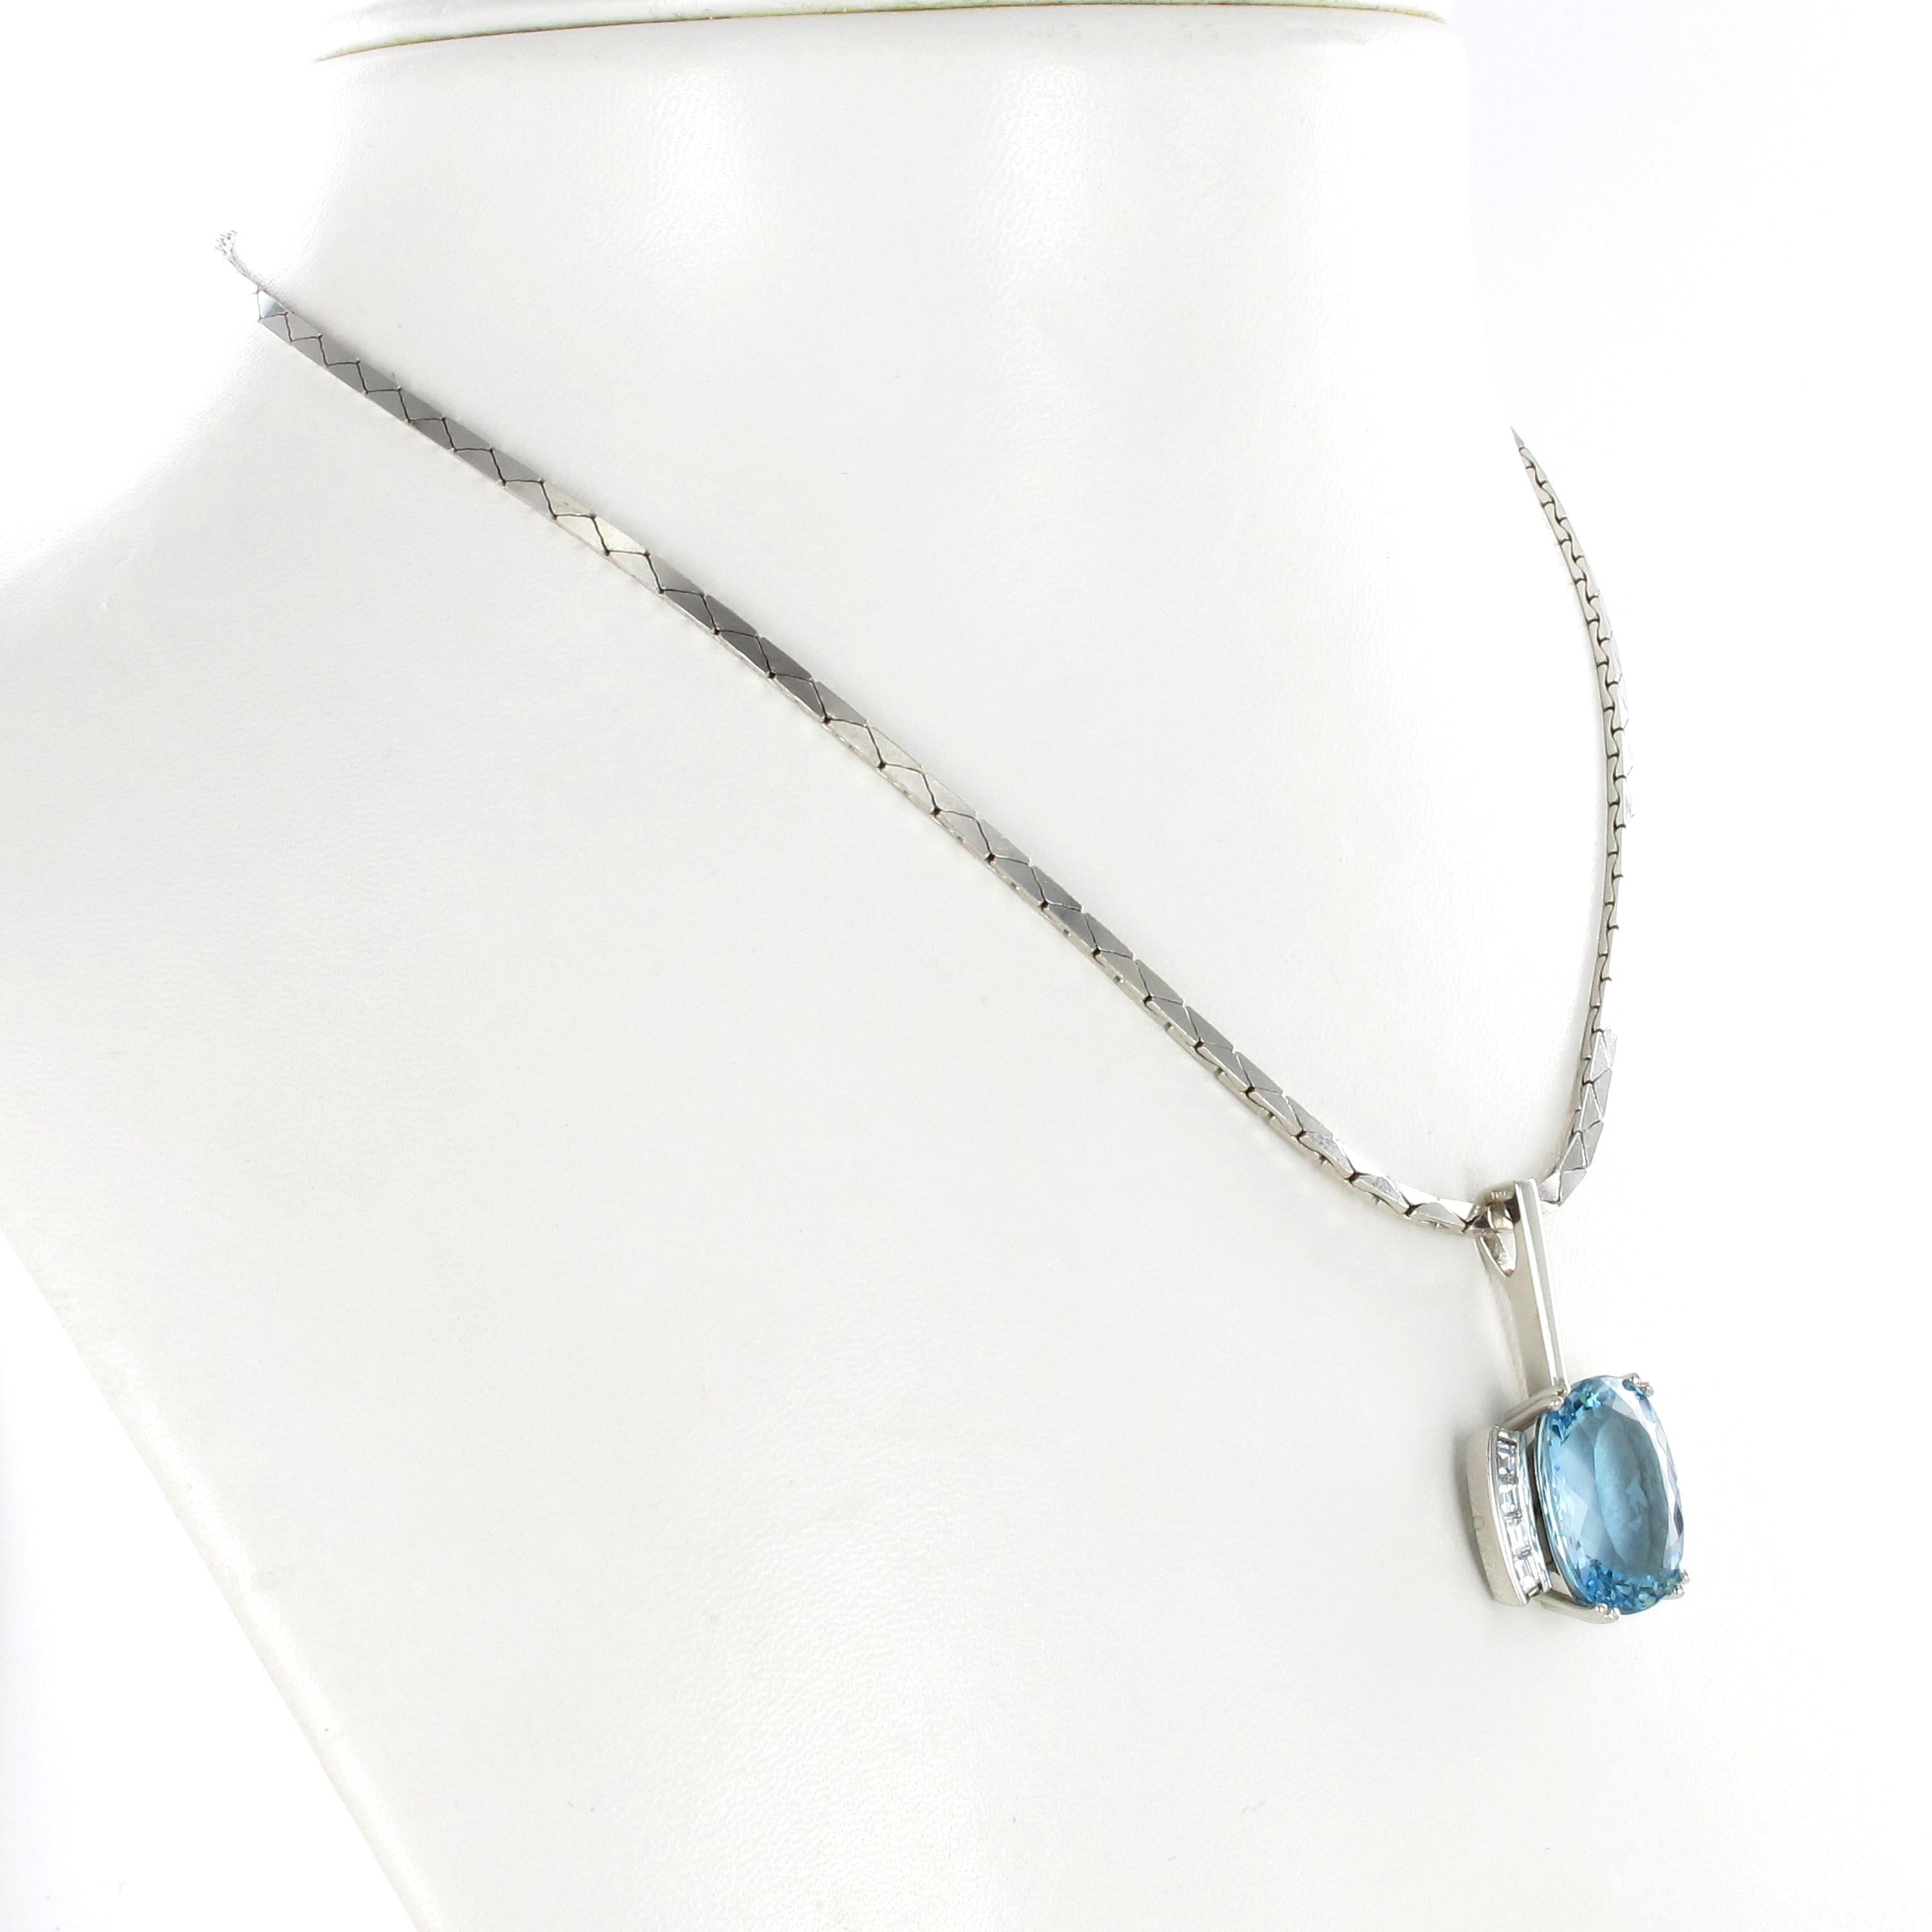 Contemporary Aquamarine and Diamond Necklace in Platinum 950 and 18 Karat White Gold For Sale